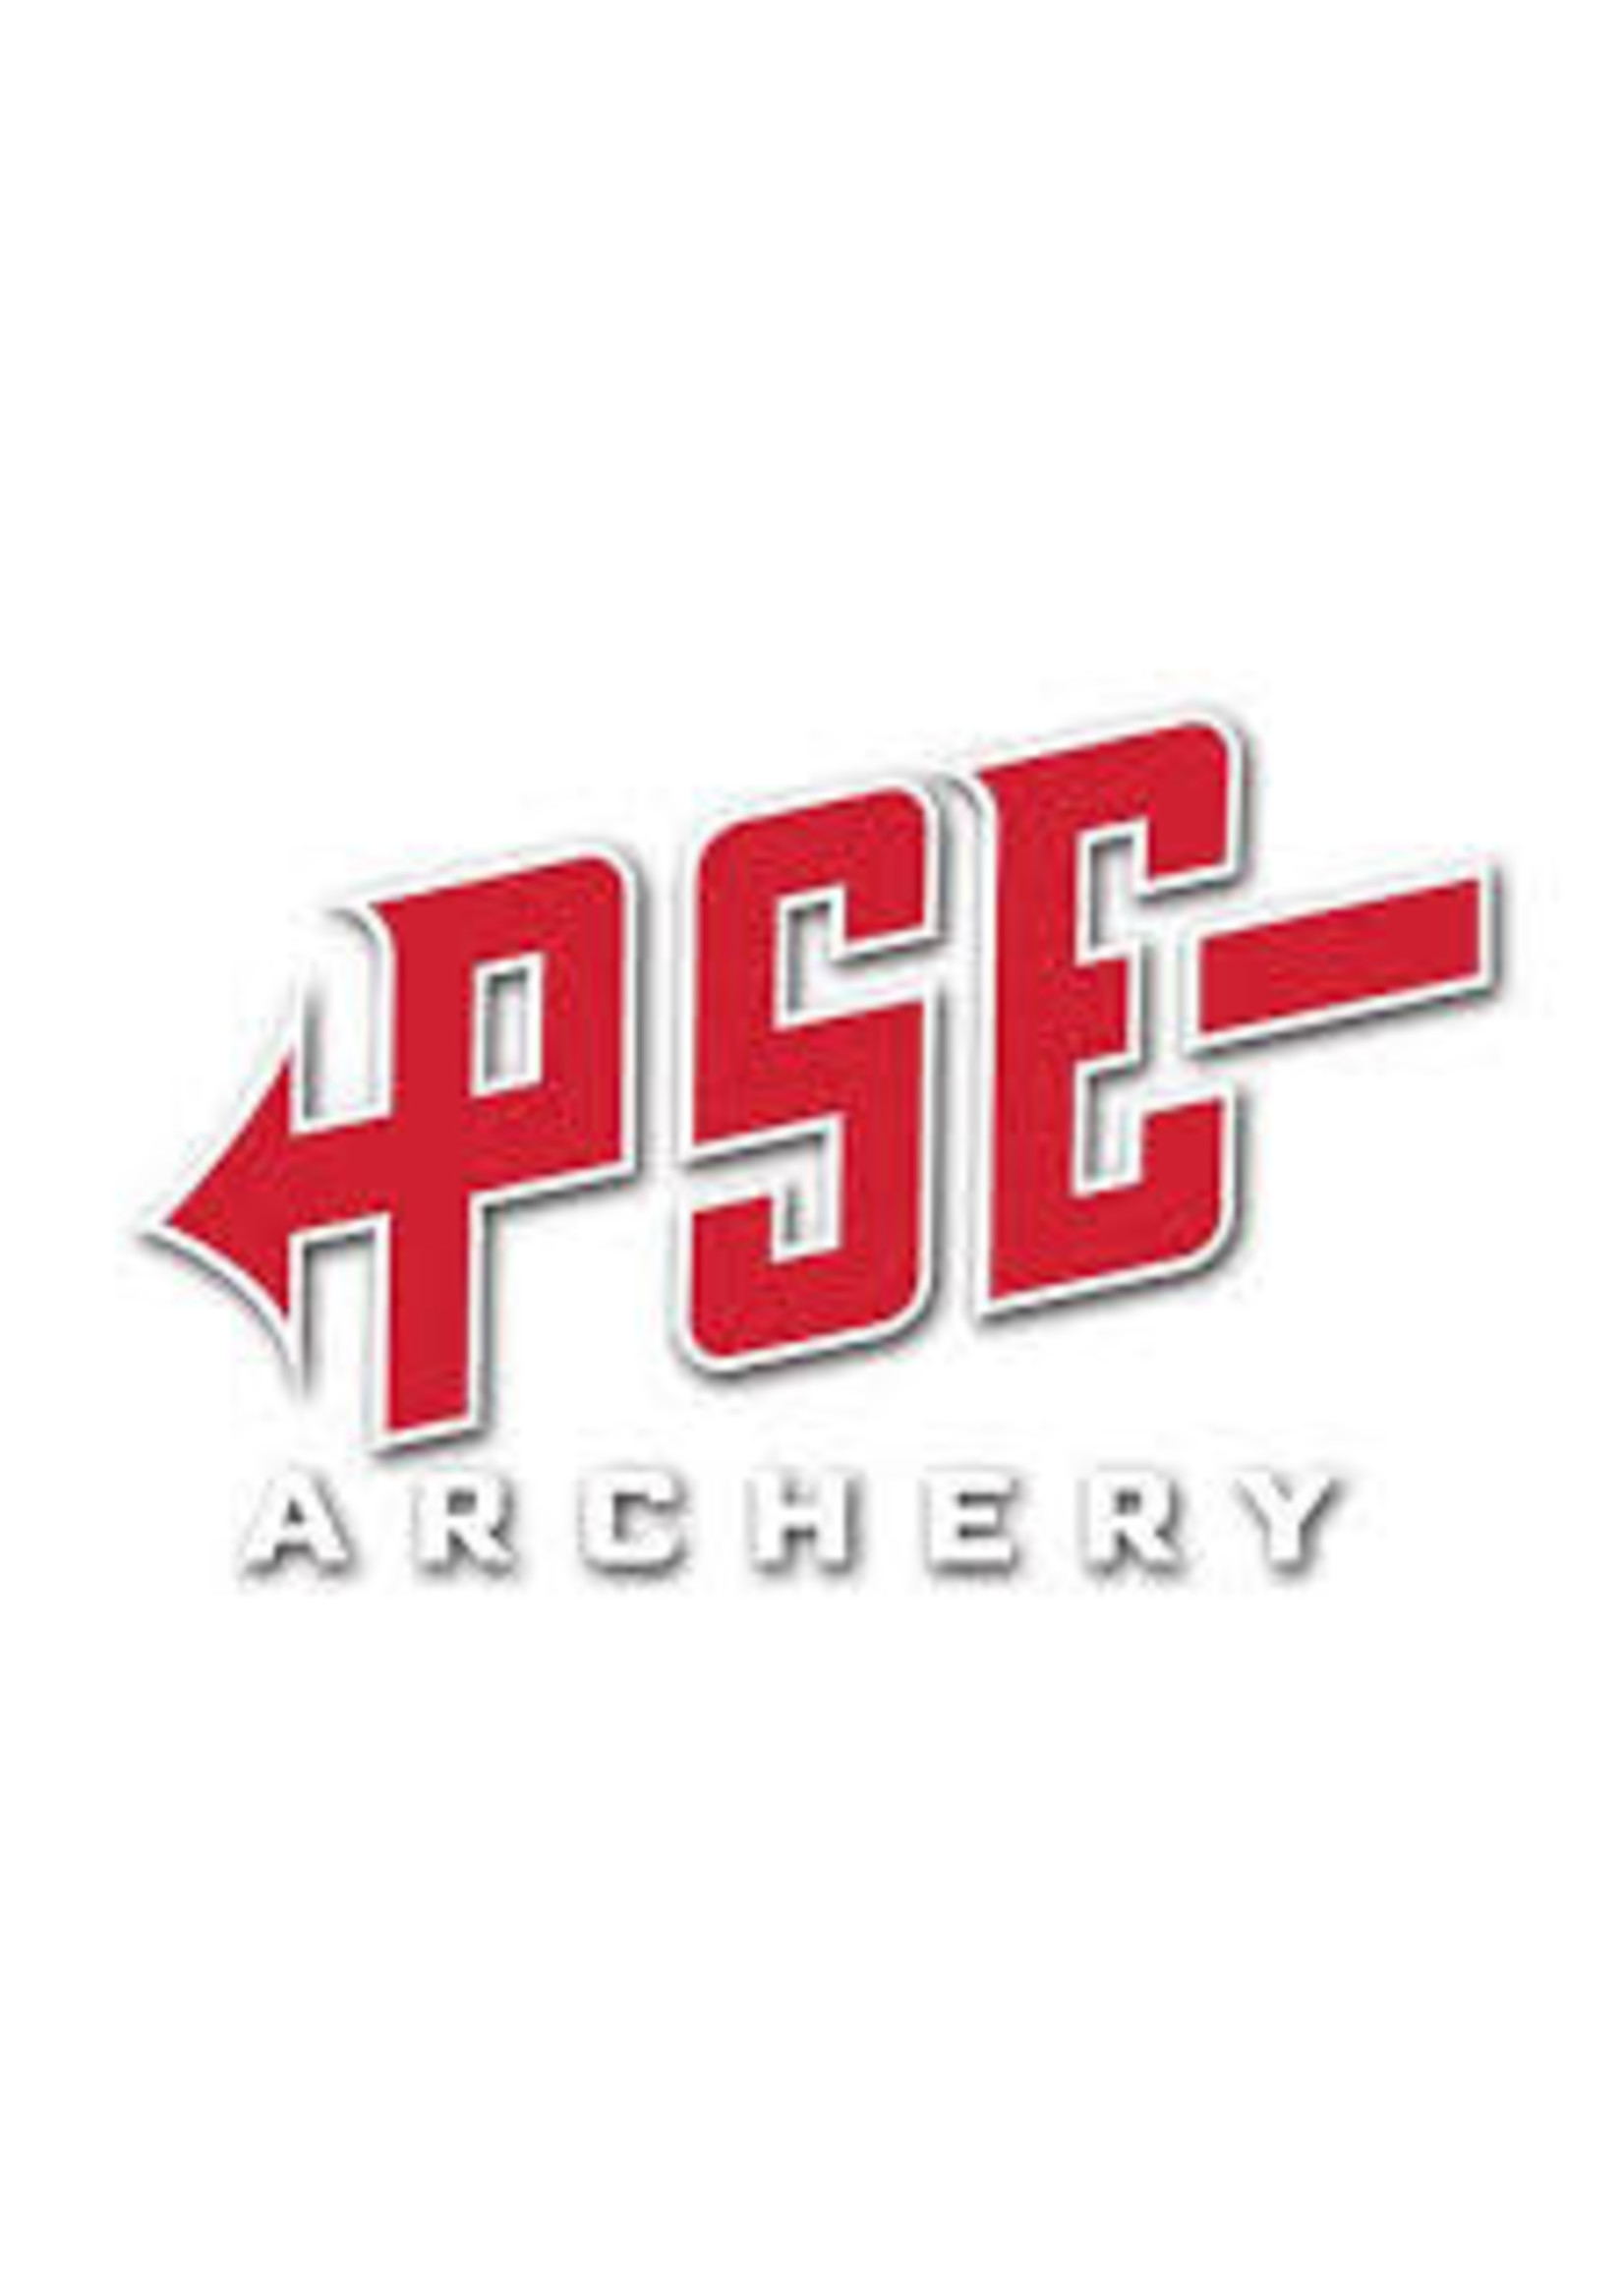 P.S.E PSE GEL DECAL 12X7